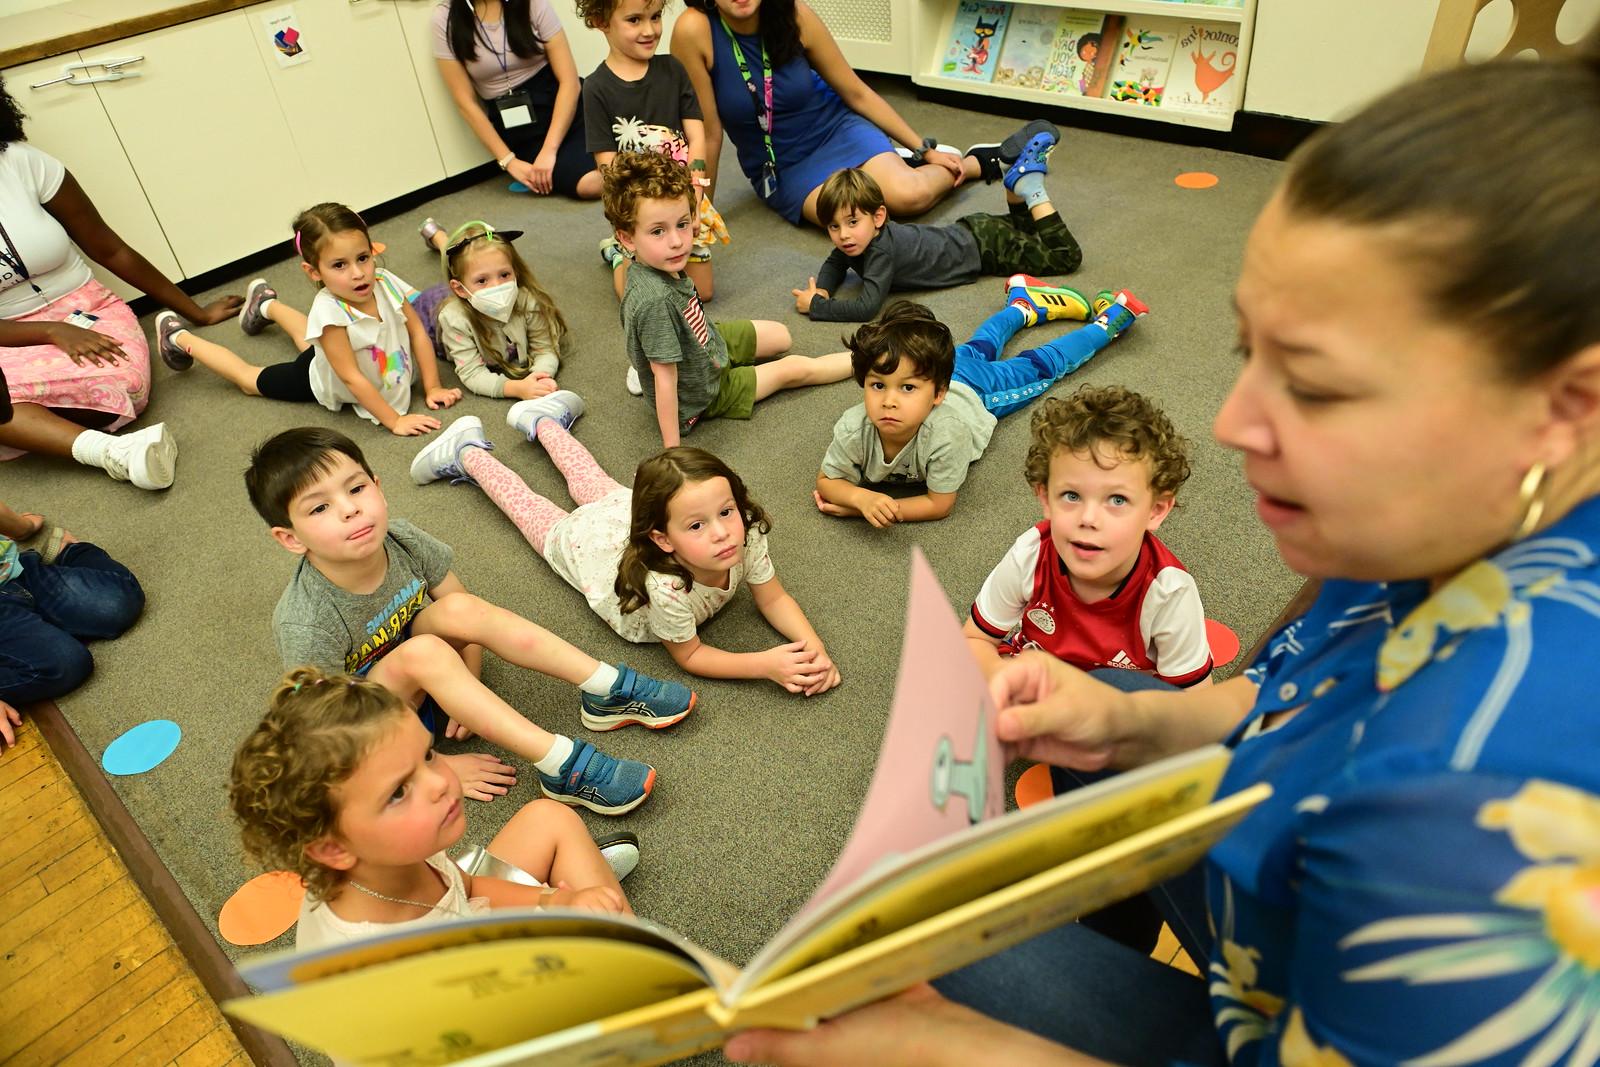 Ethical Culture's youngest learners listen on carpet as teacher reads from a book.